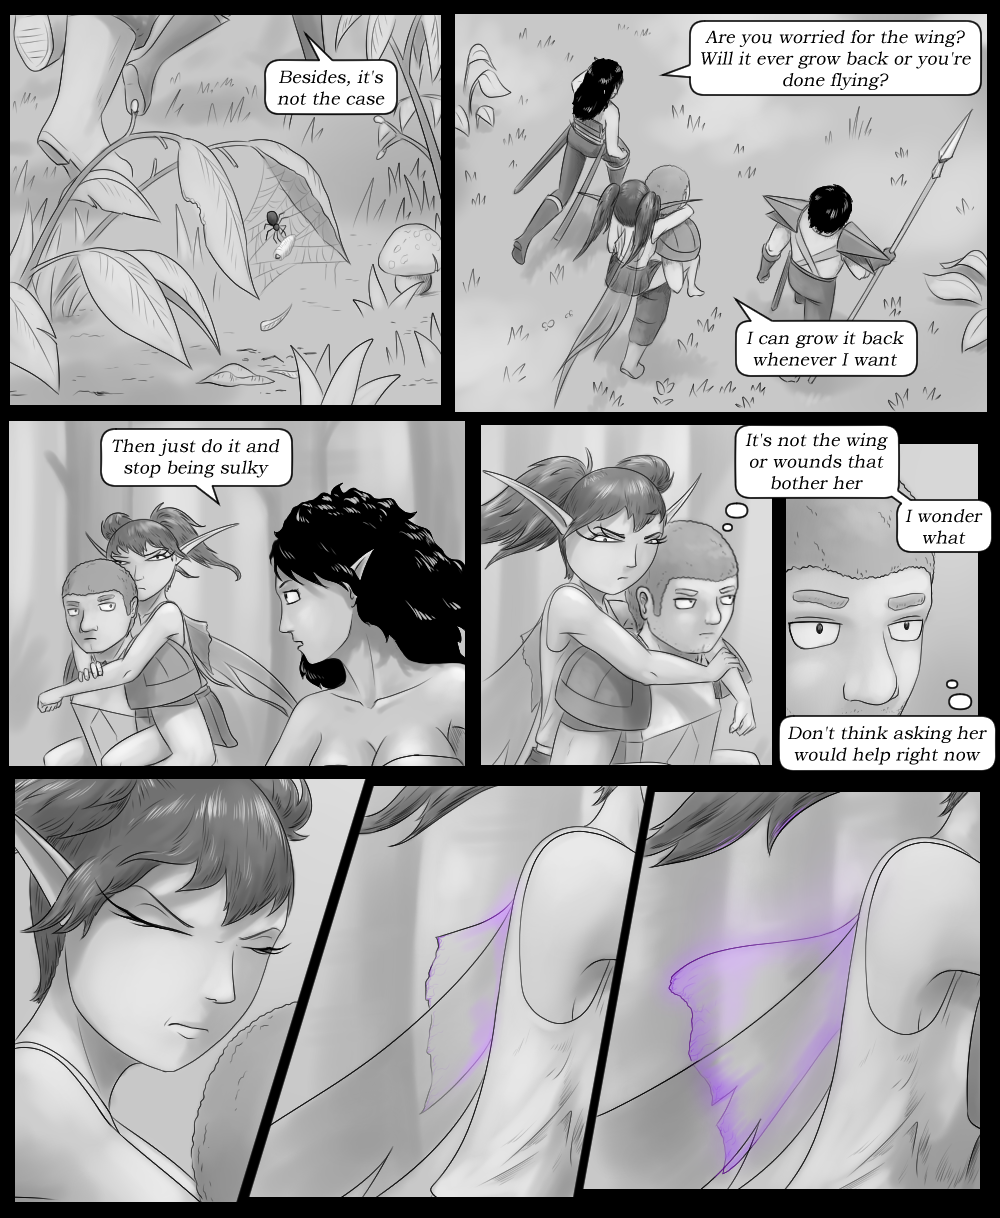 Page 10 - Bother